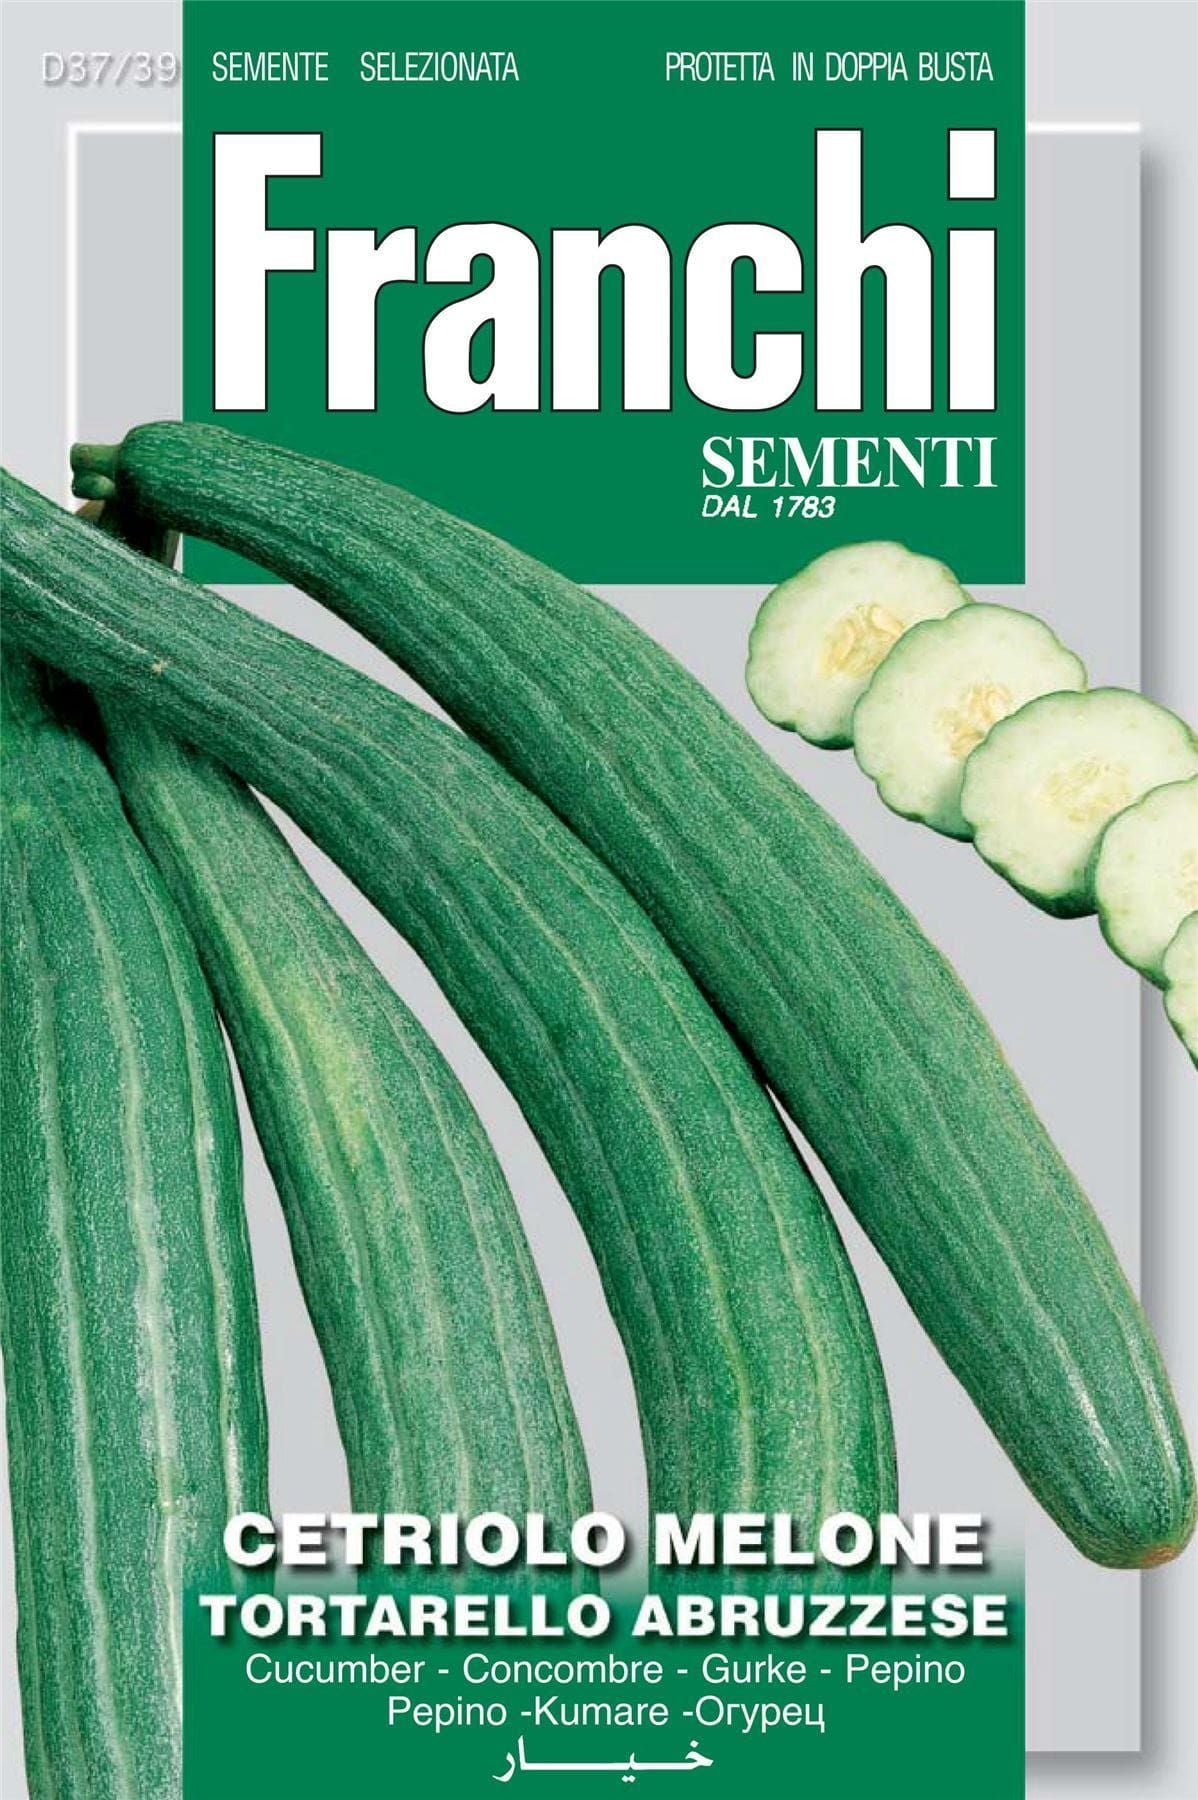 Franchi Seeds of Italy - DBO 37/39 - Cucumber Melon - Tortarello Barese - Seeds